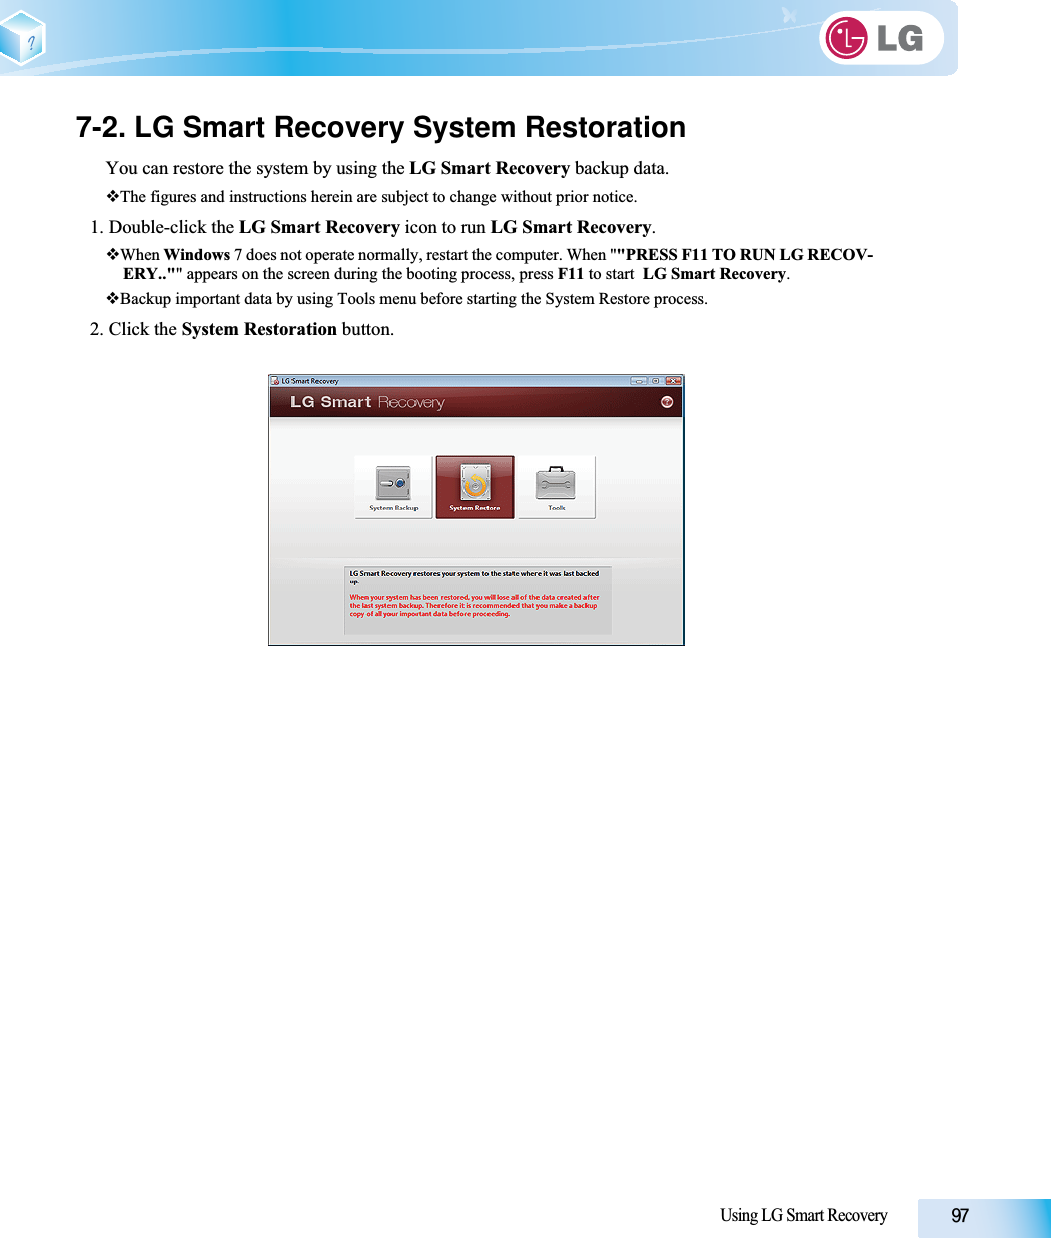 Using LG Smart Recovery7-2. LG Smart Recovery System RestorationYou can restore the system by using the LG Smart Recovery backup data.The figures and instructions herein are subject to change without prior notice.1. Double-click the LG Smart Recovery icon to run LG Smart Recovery.When Windows 7 does not operate normally, restart the computer. When &quot;&quot;PRESS F11 TO RUN LG RECOV-ERY..&quot;&quot; appears on the screen during the booting process, press F11 to start  LG Smart Recovery.Backup important data by using Tools menu before starting the System Restore process. 2. Click the System Restoration button.